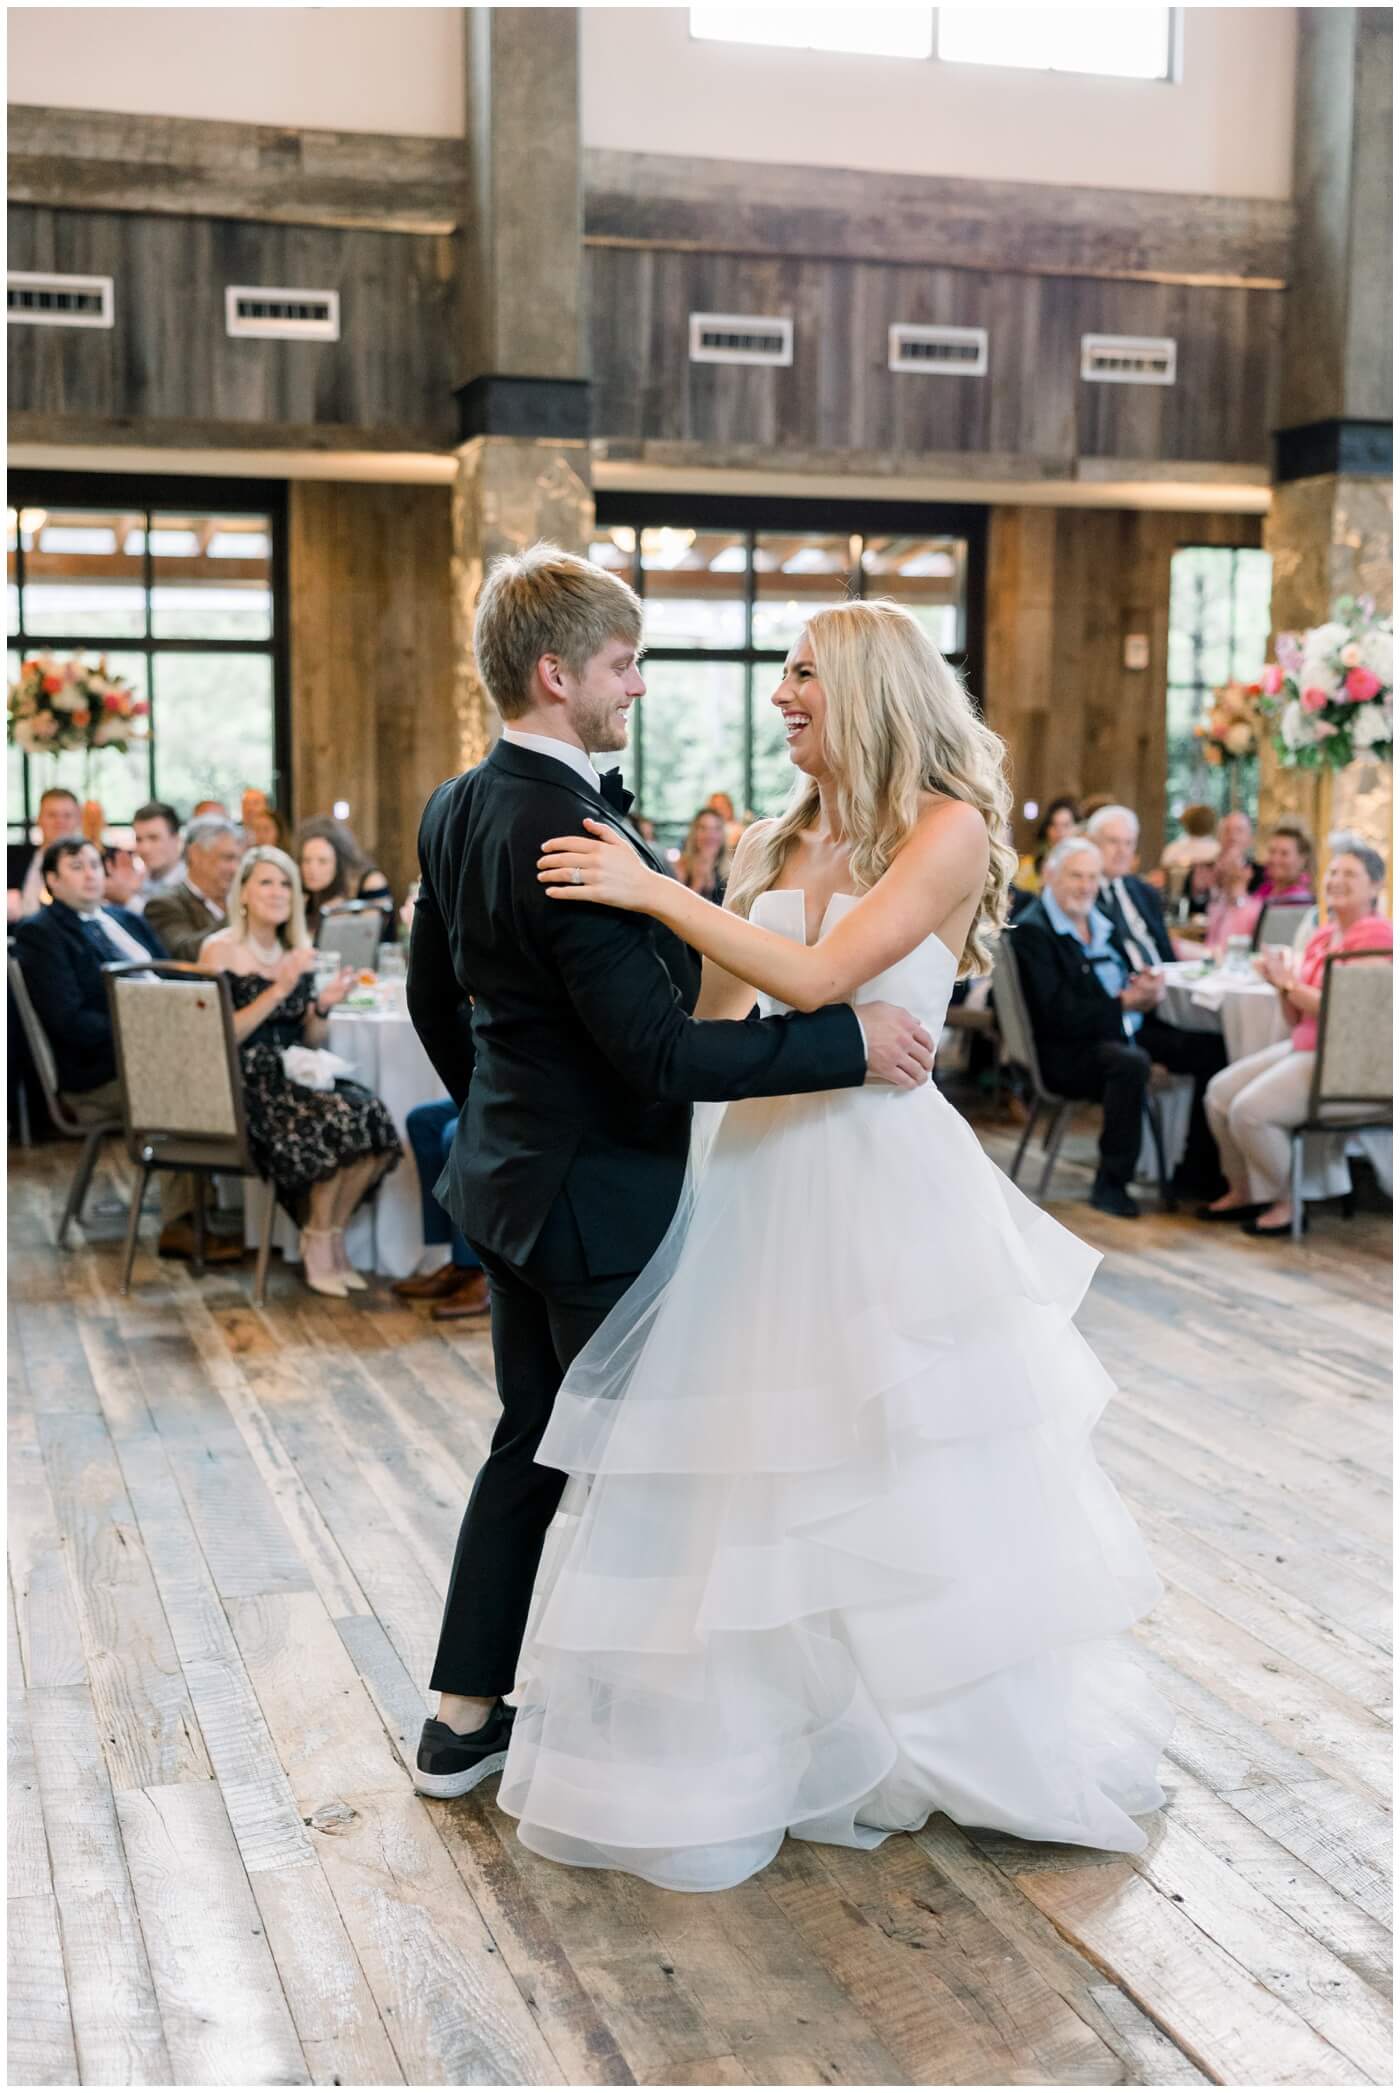 The bride and groom share their first dance as husband and wife